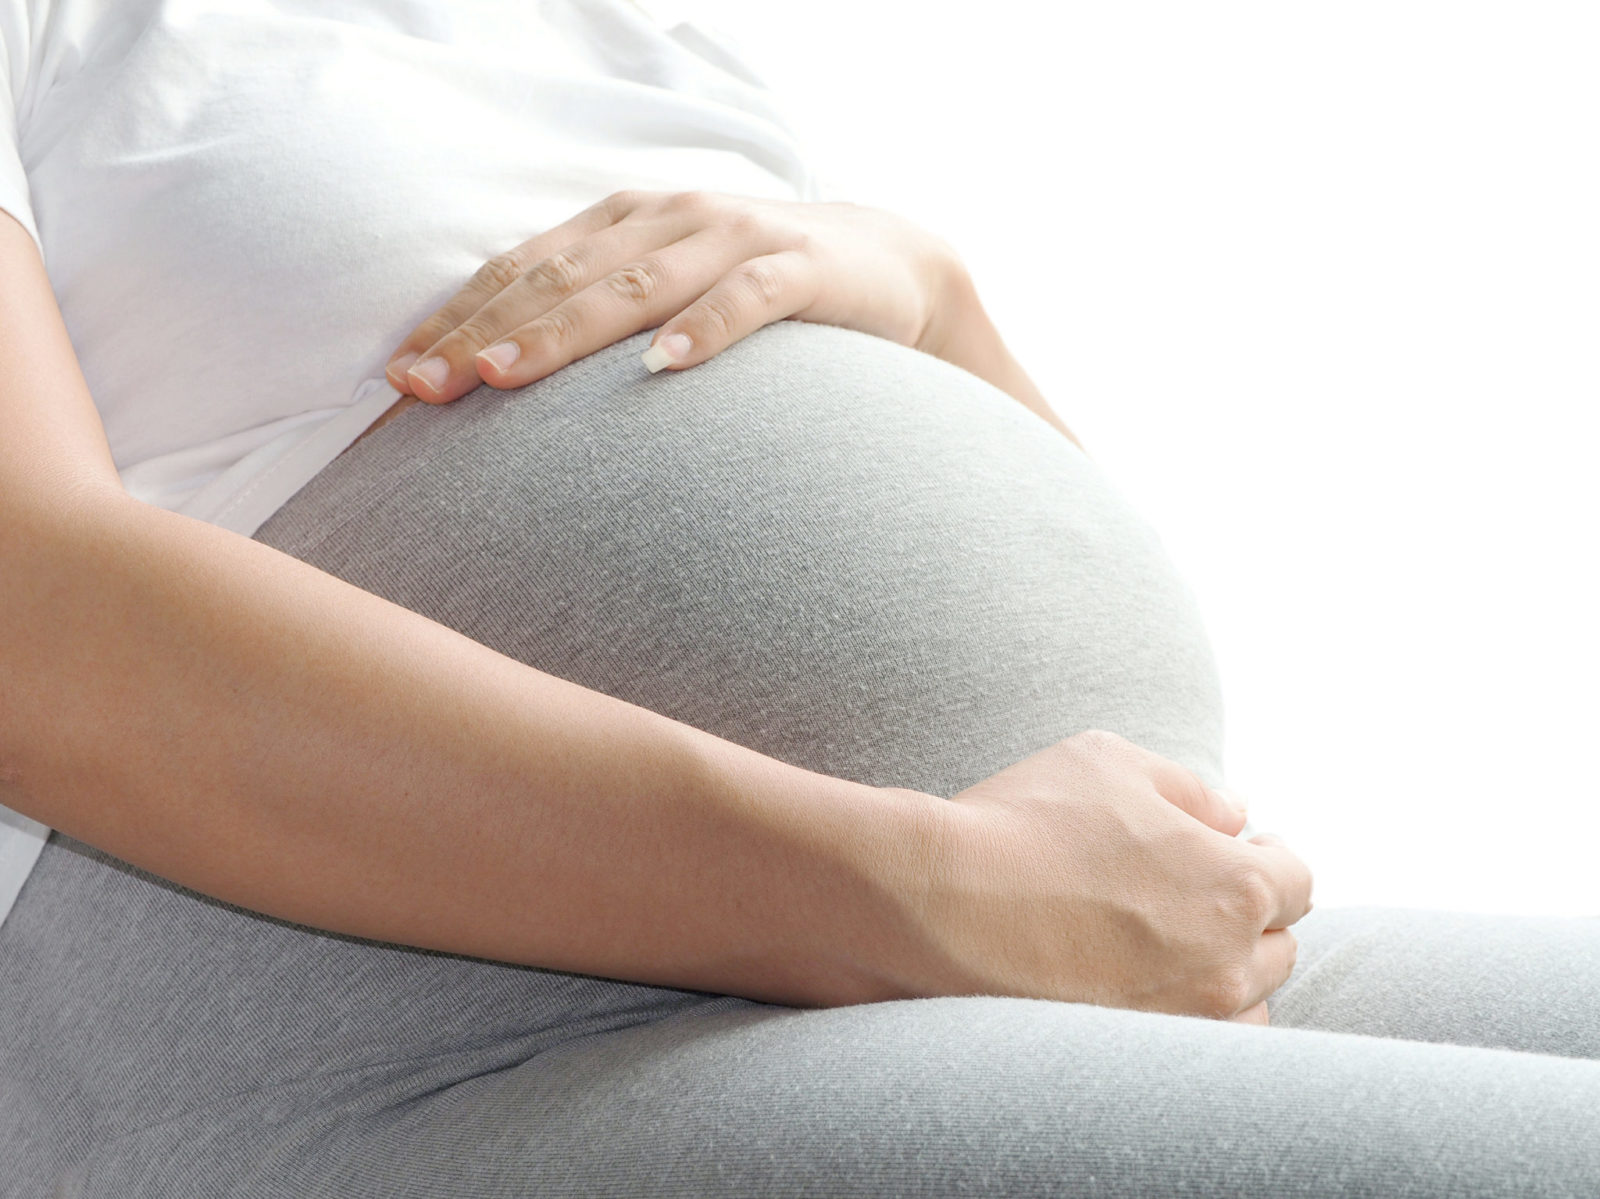 stress-a-leading-cause-of-high-risk-pregnancy-in-first-time-mothers